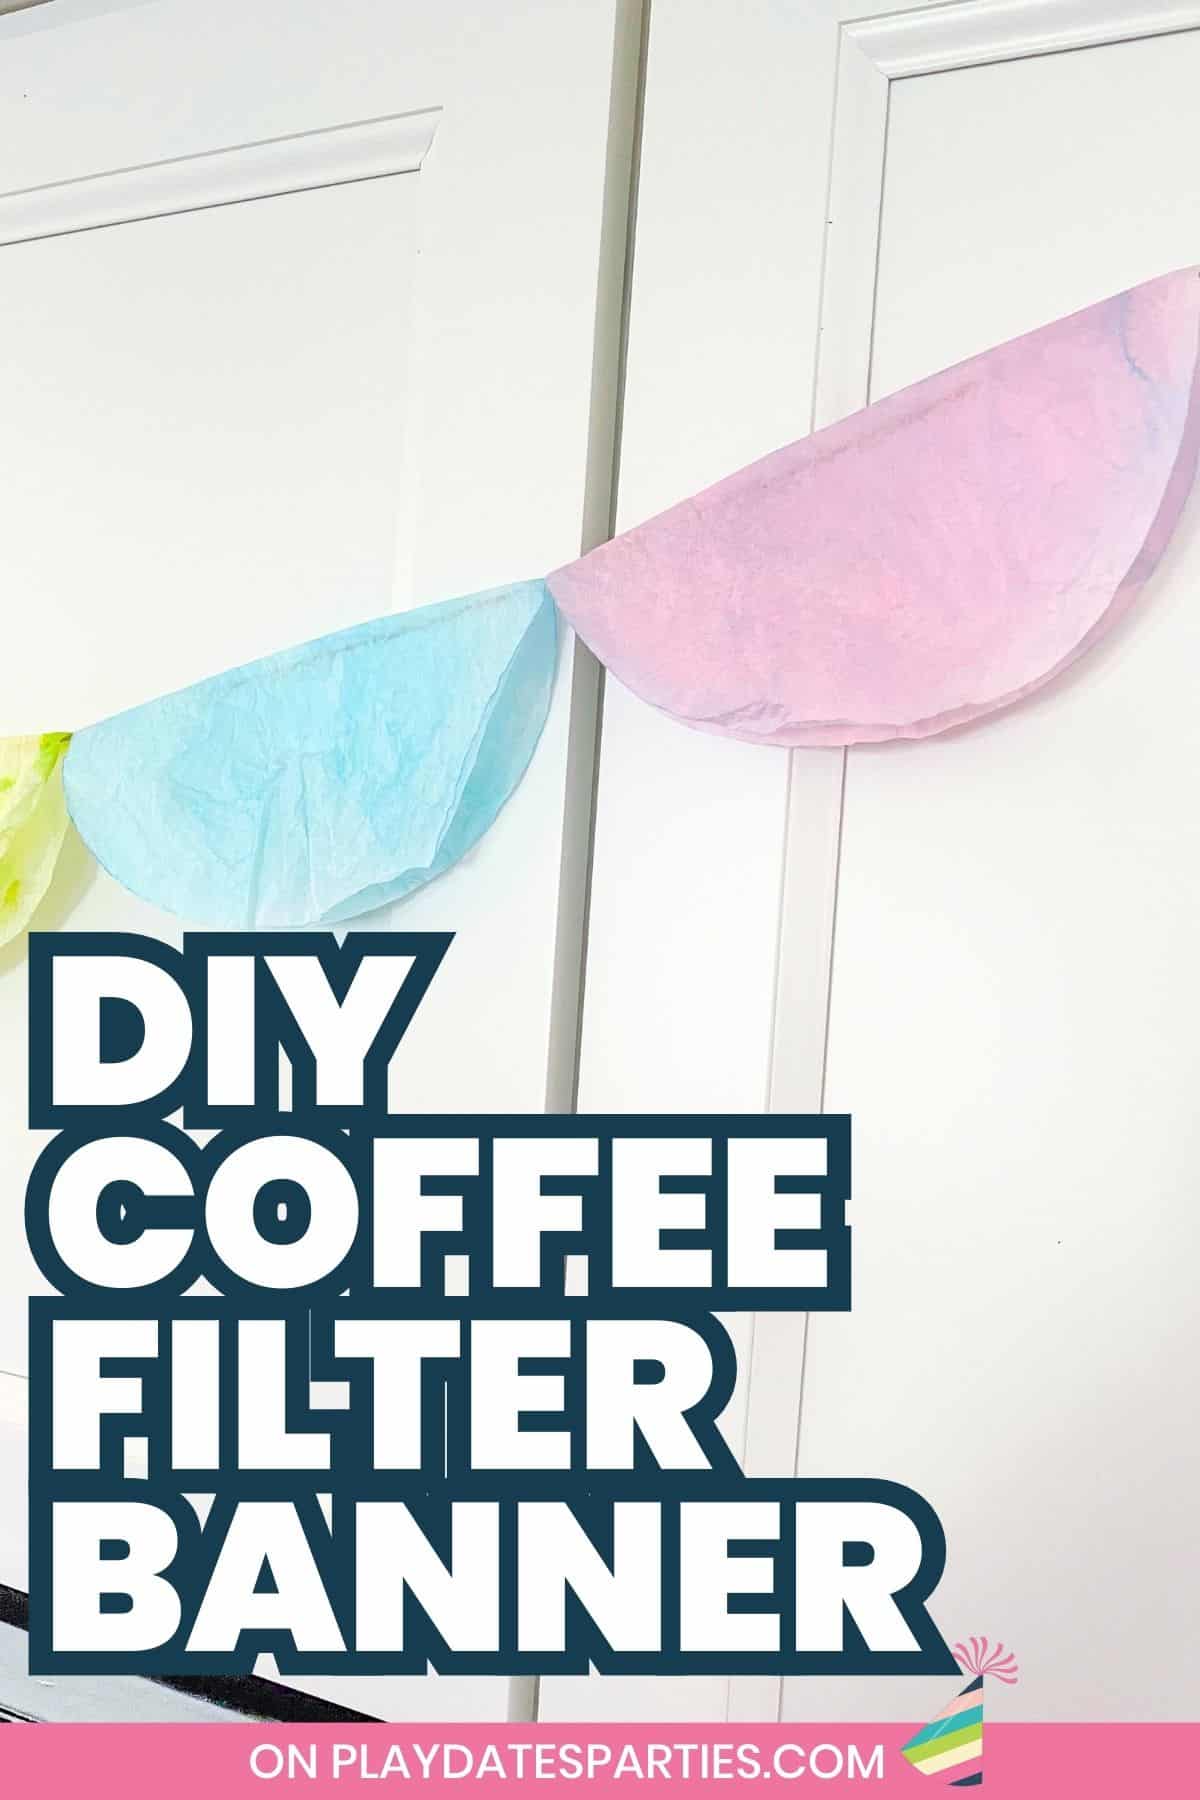 Coffee filter party banner Pin Image.